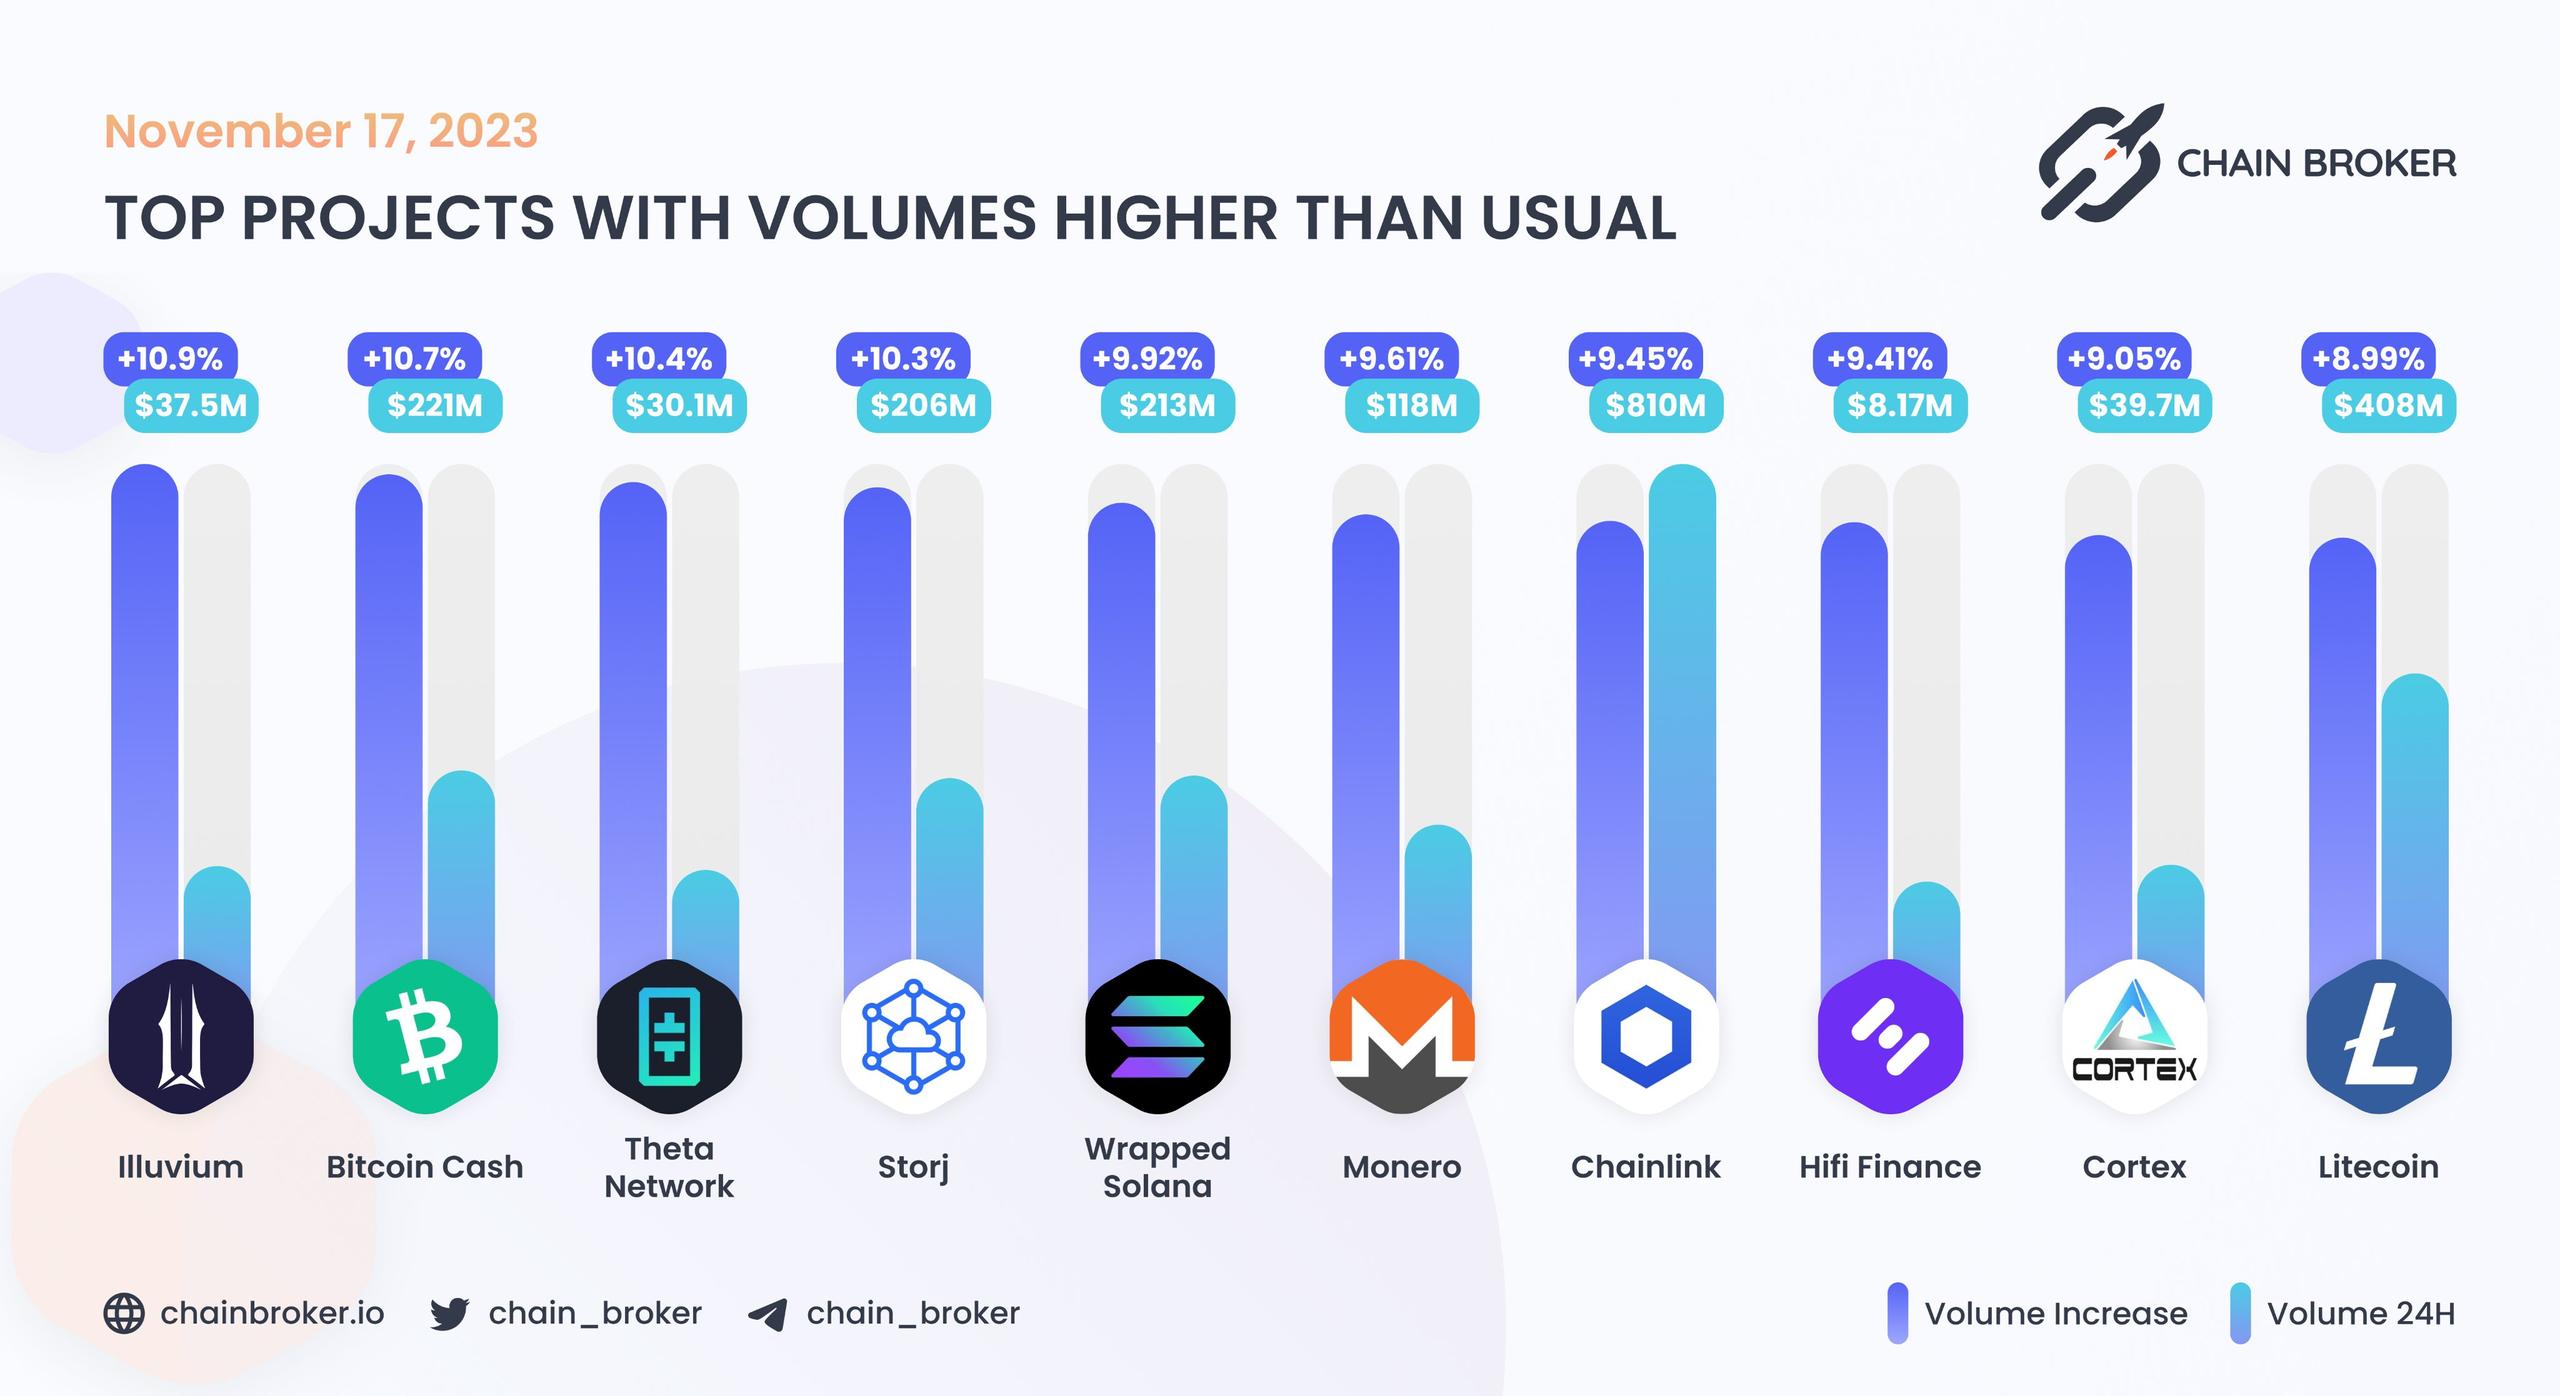 Top projects with volumes higher than usual